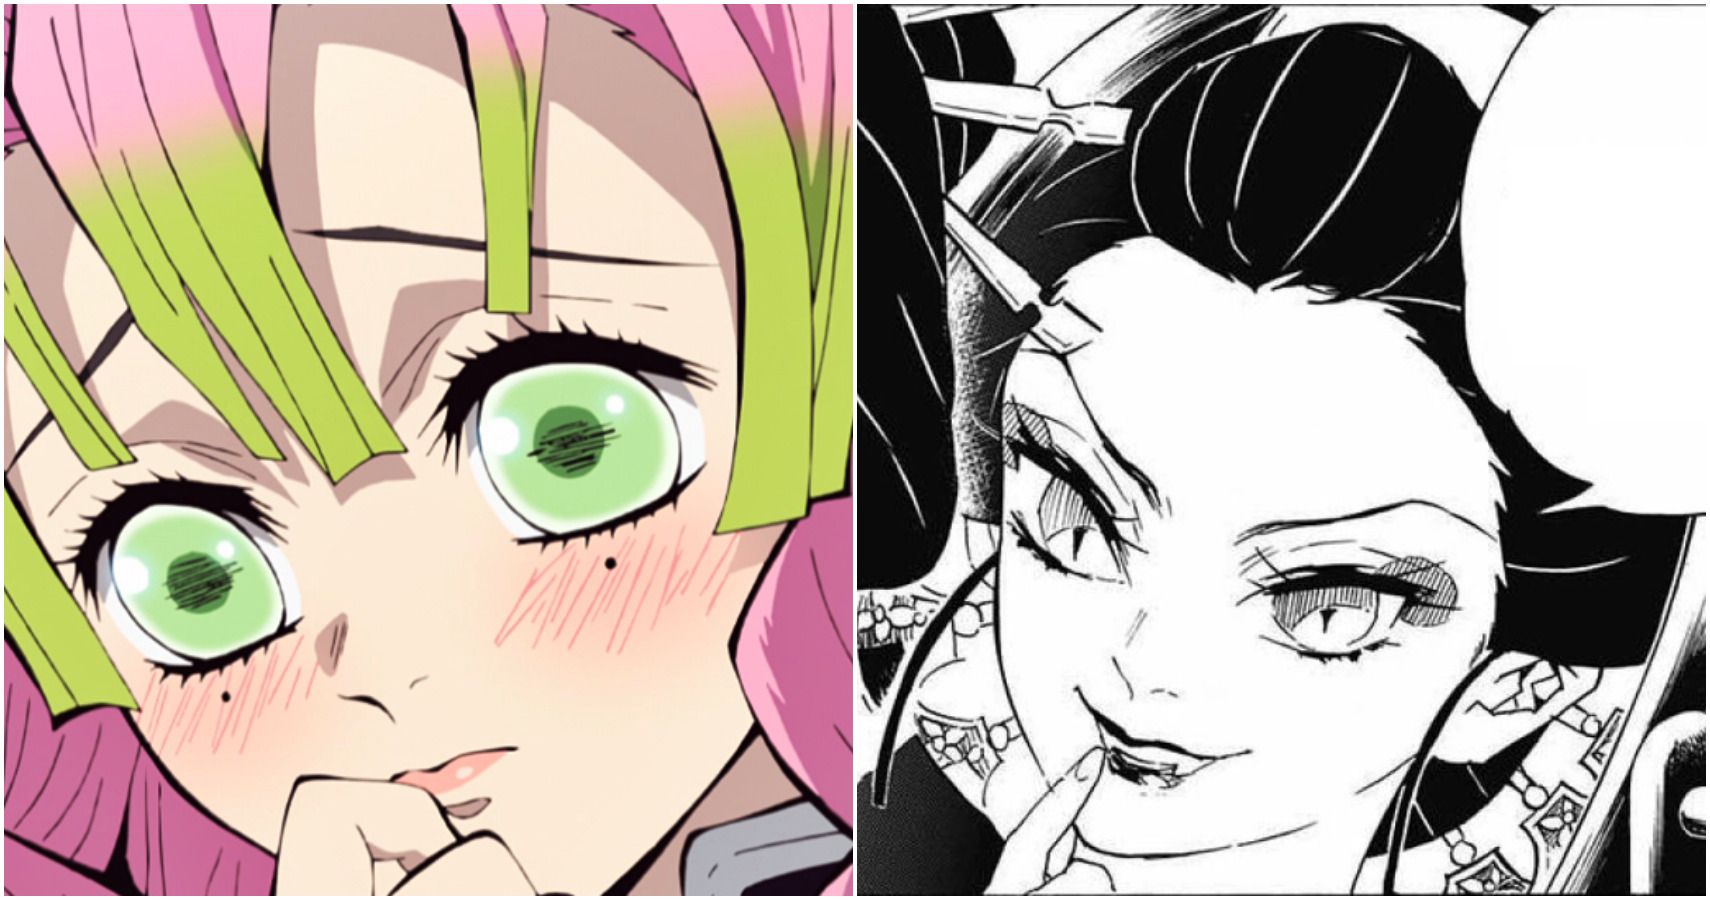 The 10 Strongest Women In Demon Slayer Ranked According To Strength. 